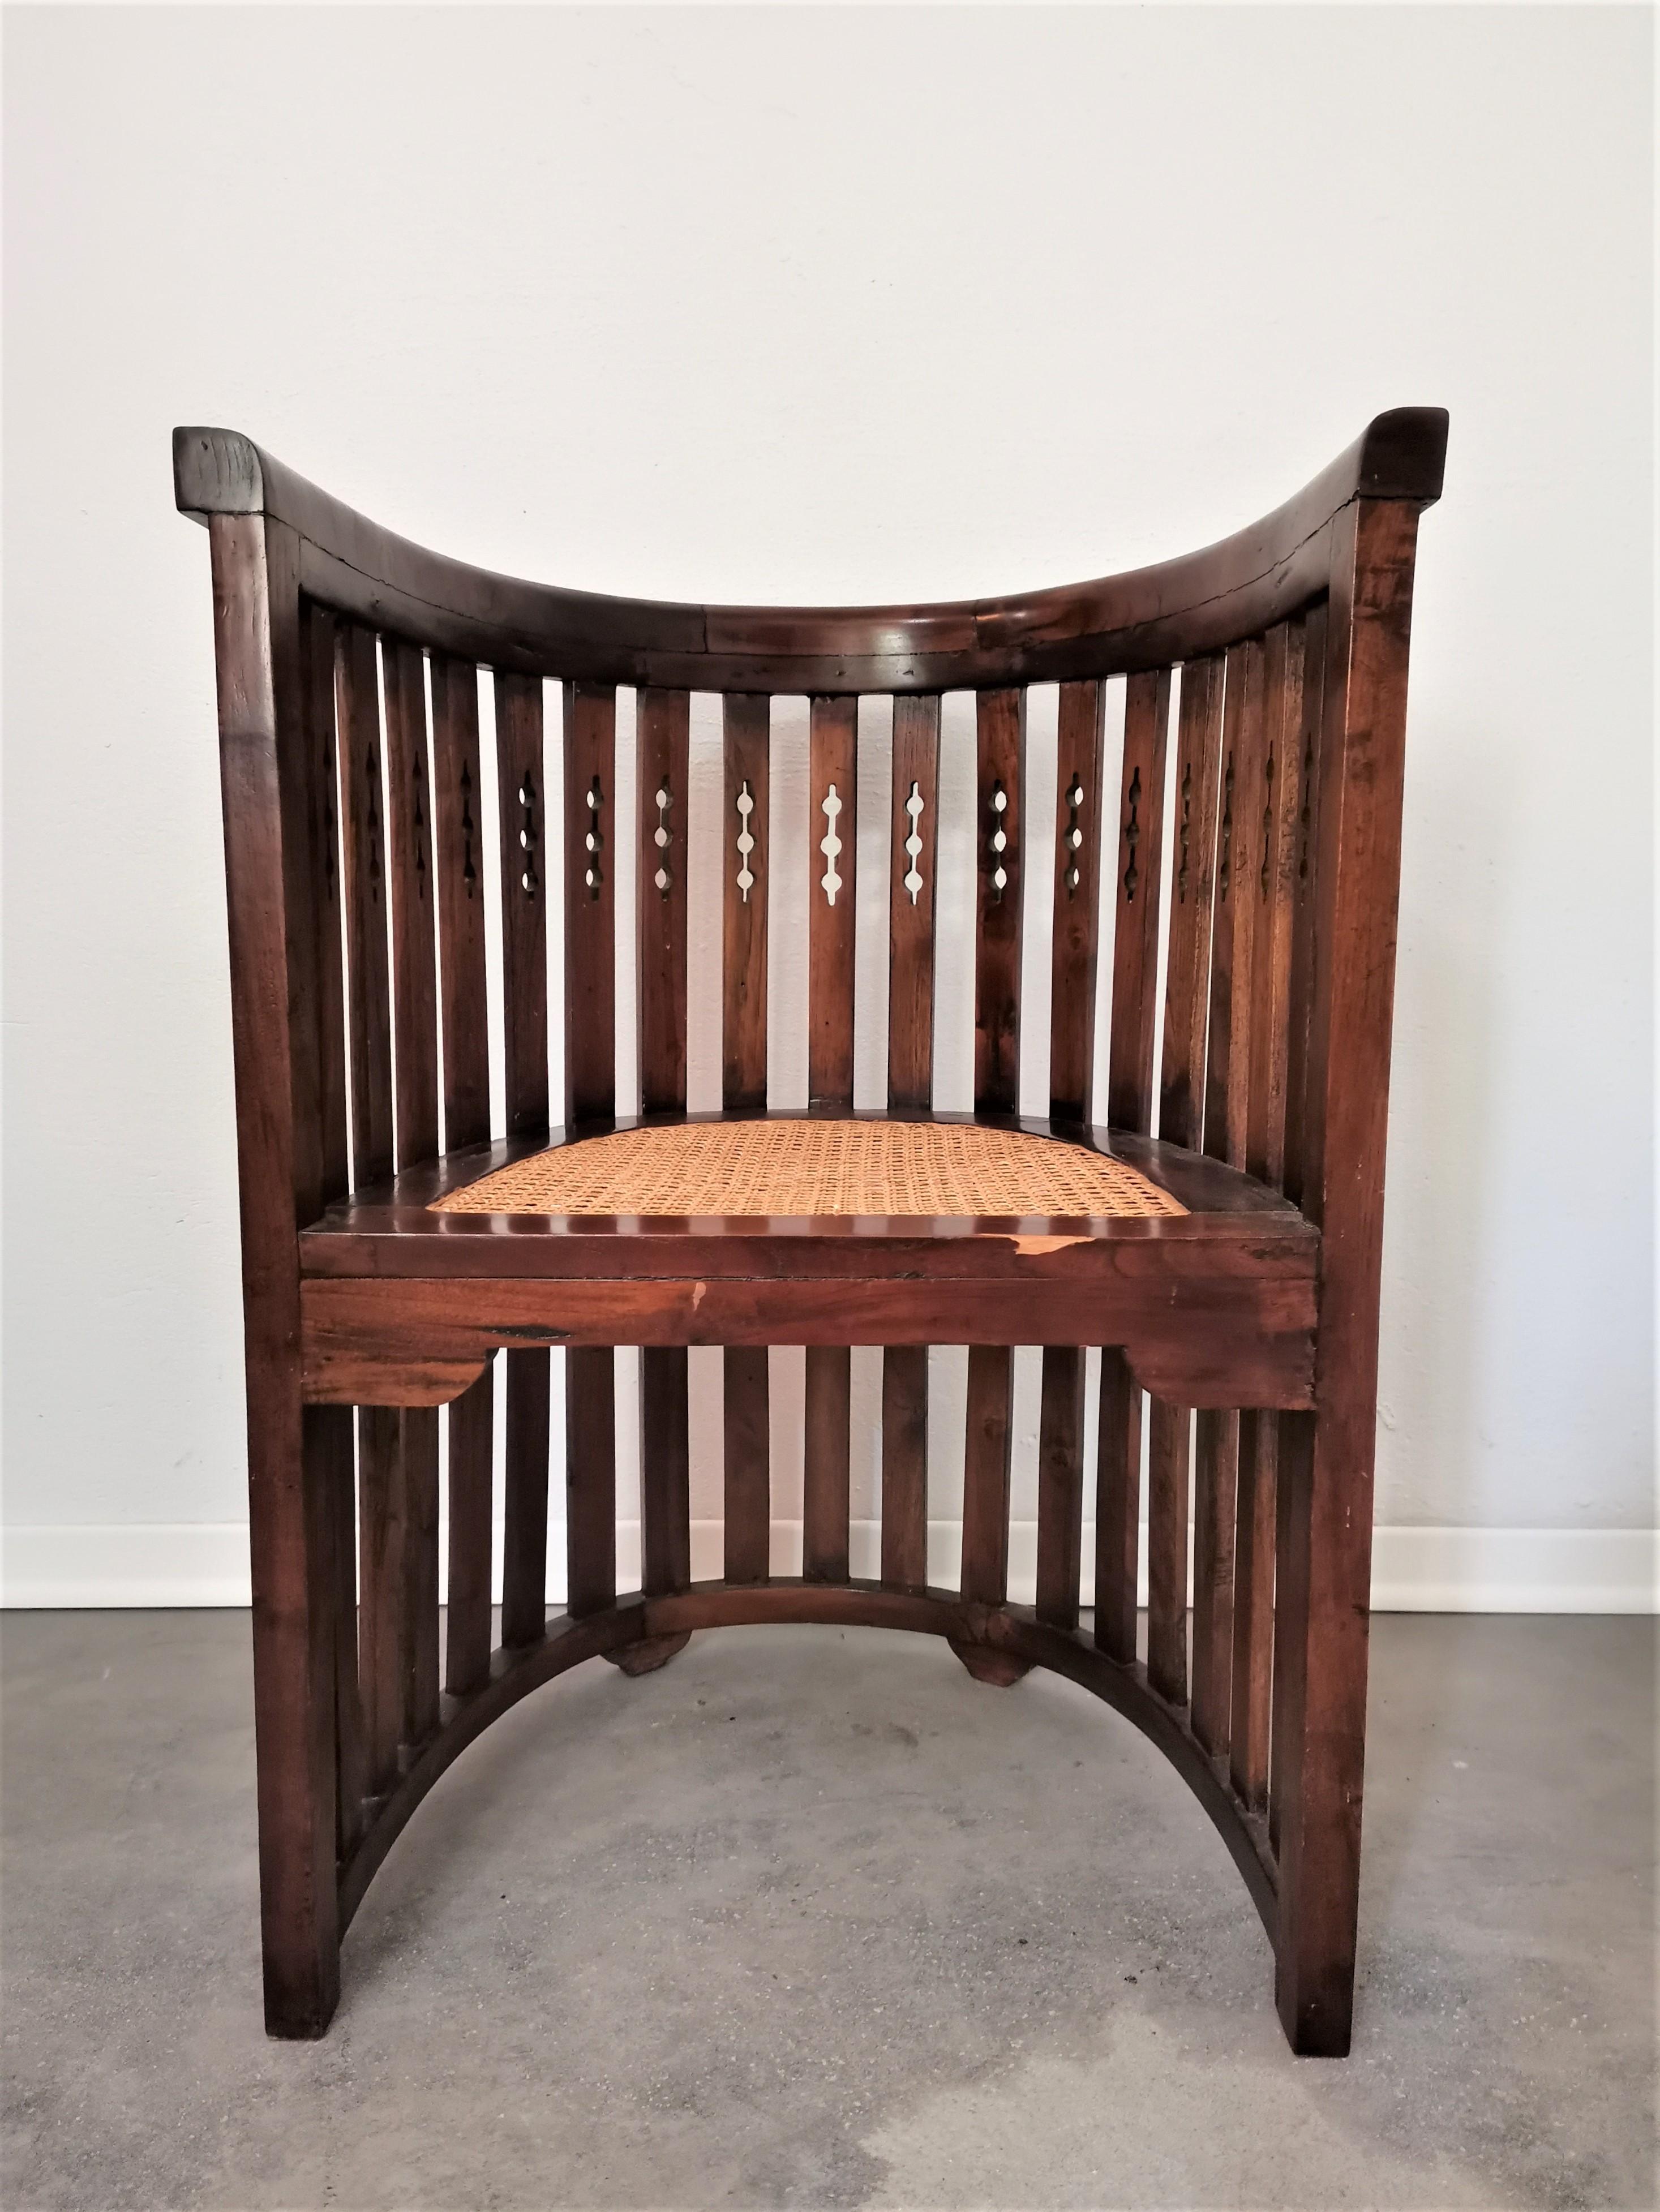 Vienna Secession Armchair

Period: 1920s

Designer: Joseph Hoffman style

Country of Manufacturer: Austria

Materials: wood, cane

Colours: brown, walnut

Condition: very good vintage condition, traces of use and age, small part missing